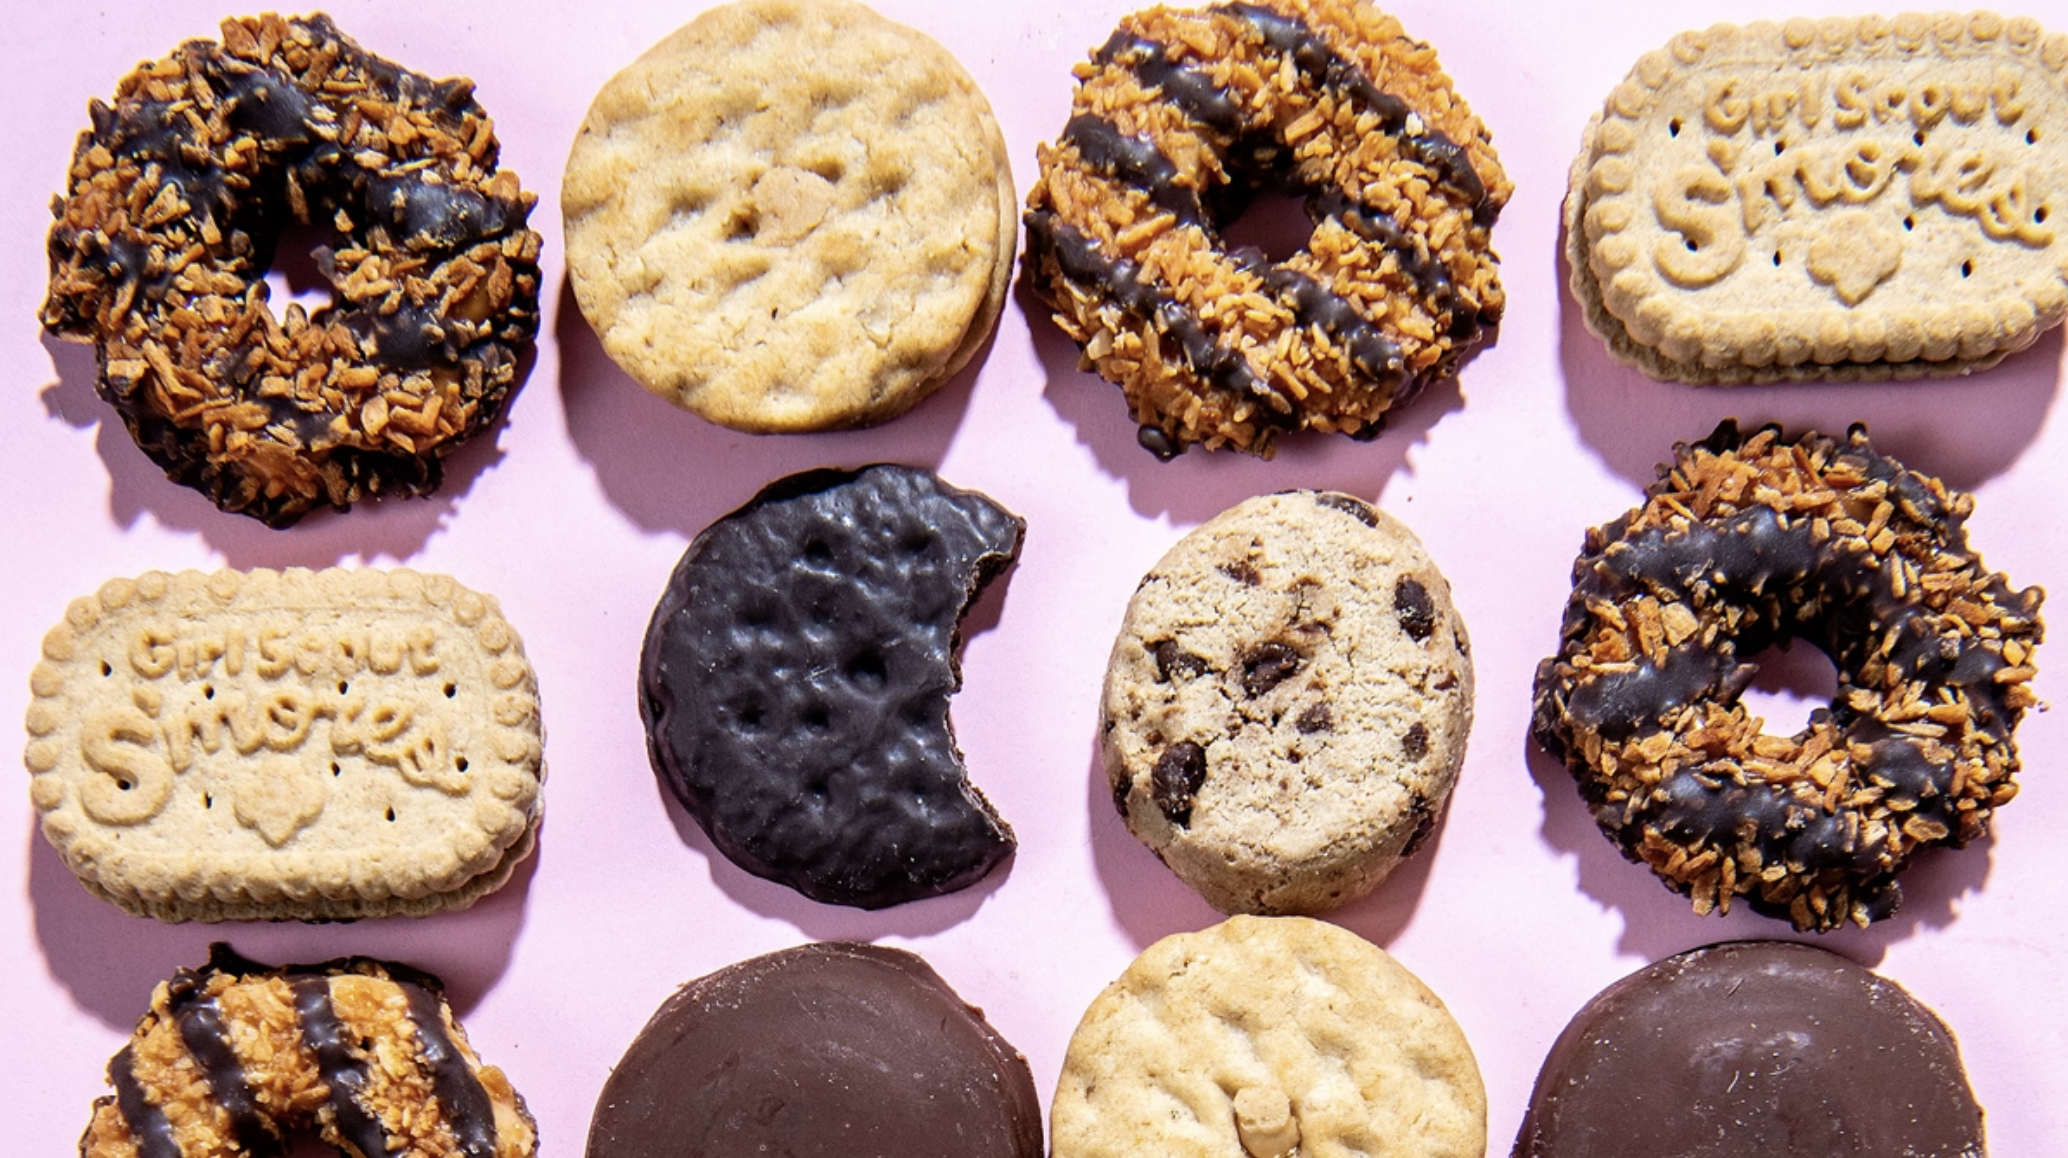 Scouts sell 2.6 million boxes of cookies